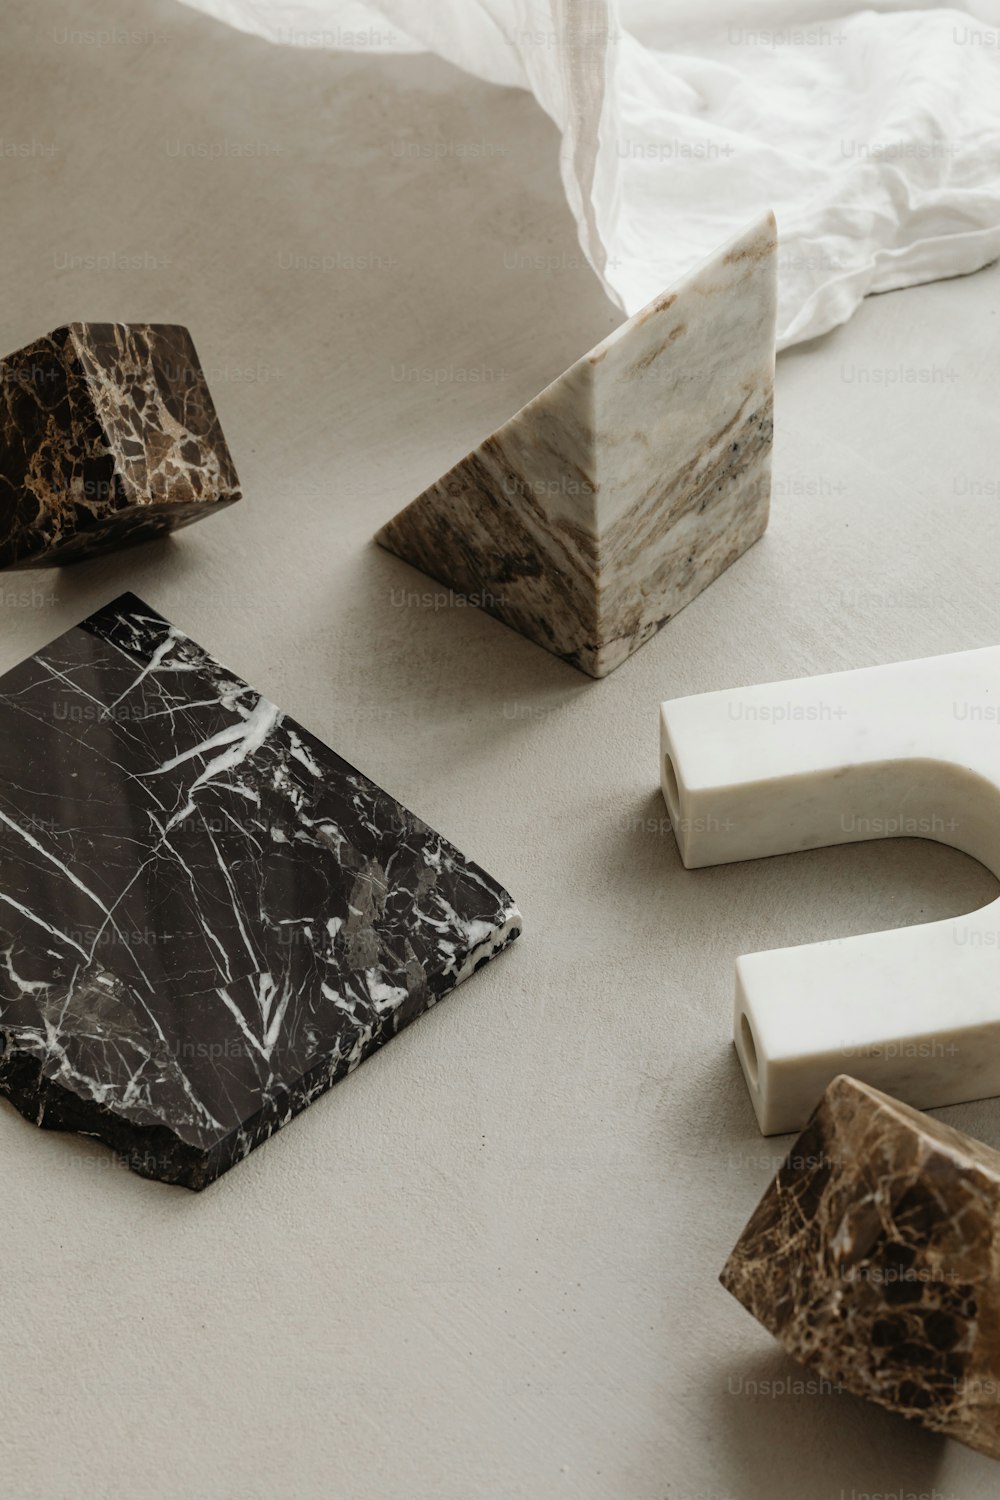 marble blocks and a paper towel on a table